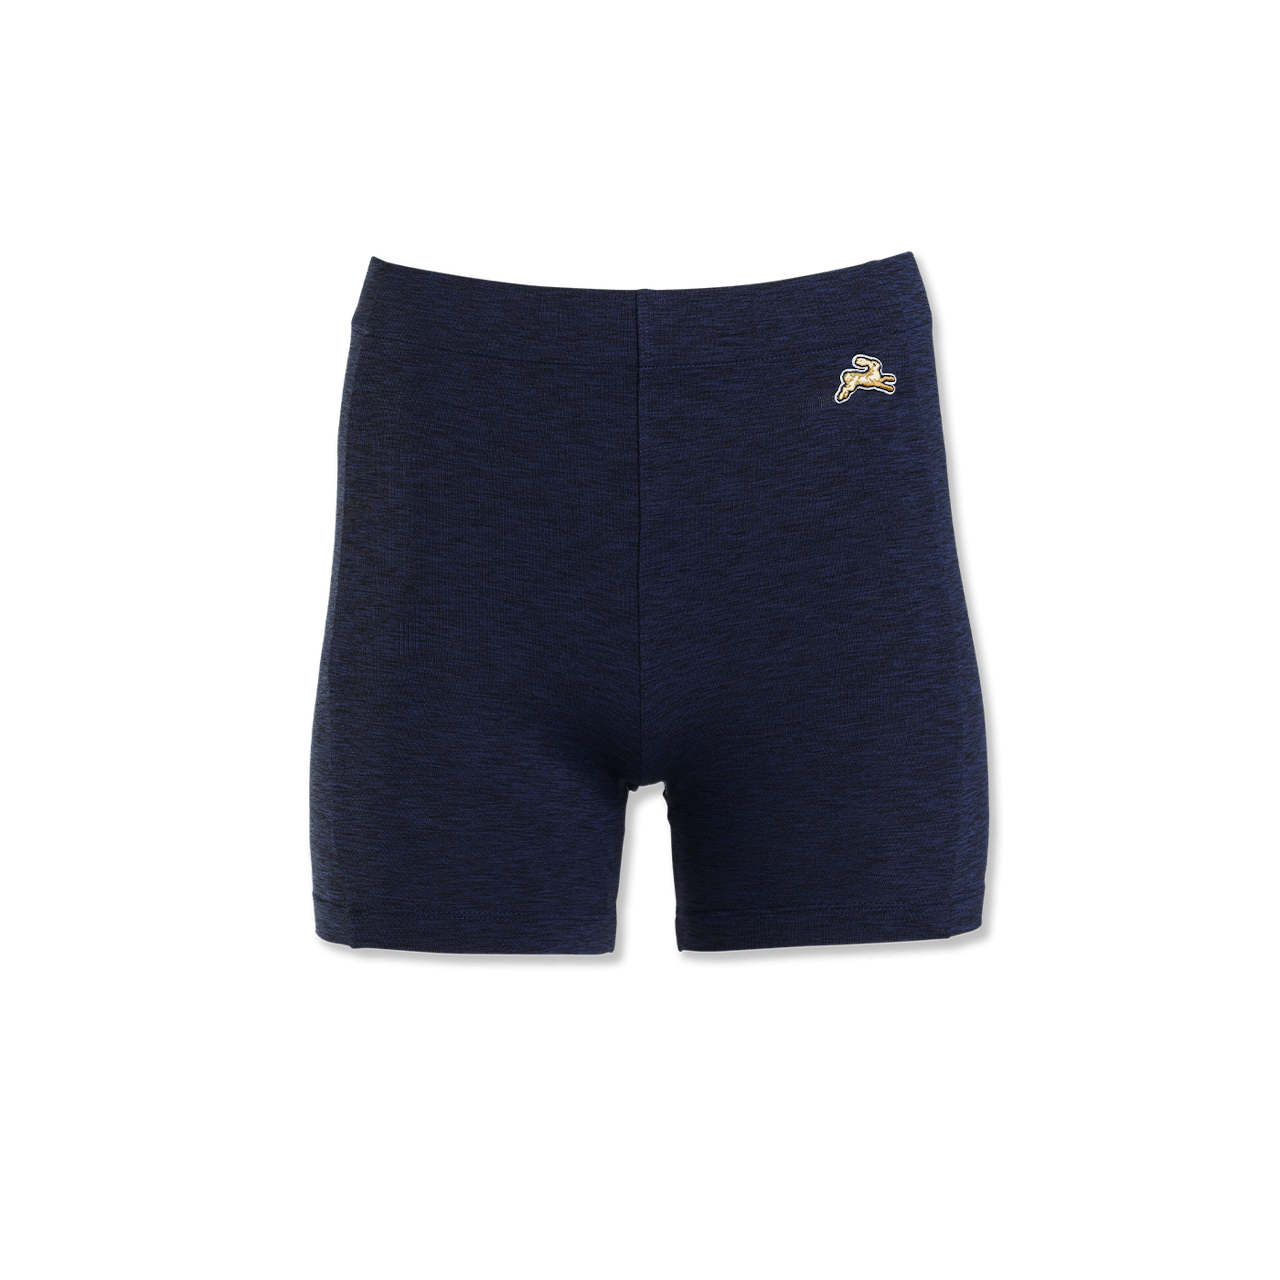 https://tracksmith-media.imgix.net/Spring21-Womens-Session-Short-5-inch-Navy-On-Model.png?auto=format,compress&crop=faces&dpr=2&fit=crop&h=640&w=640